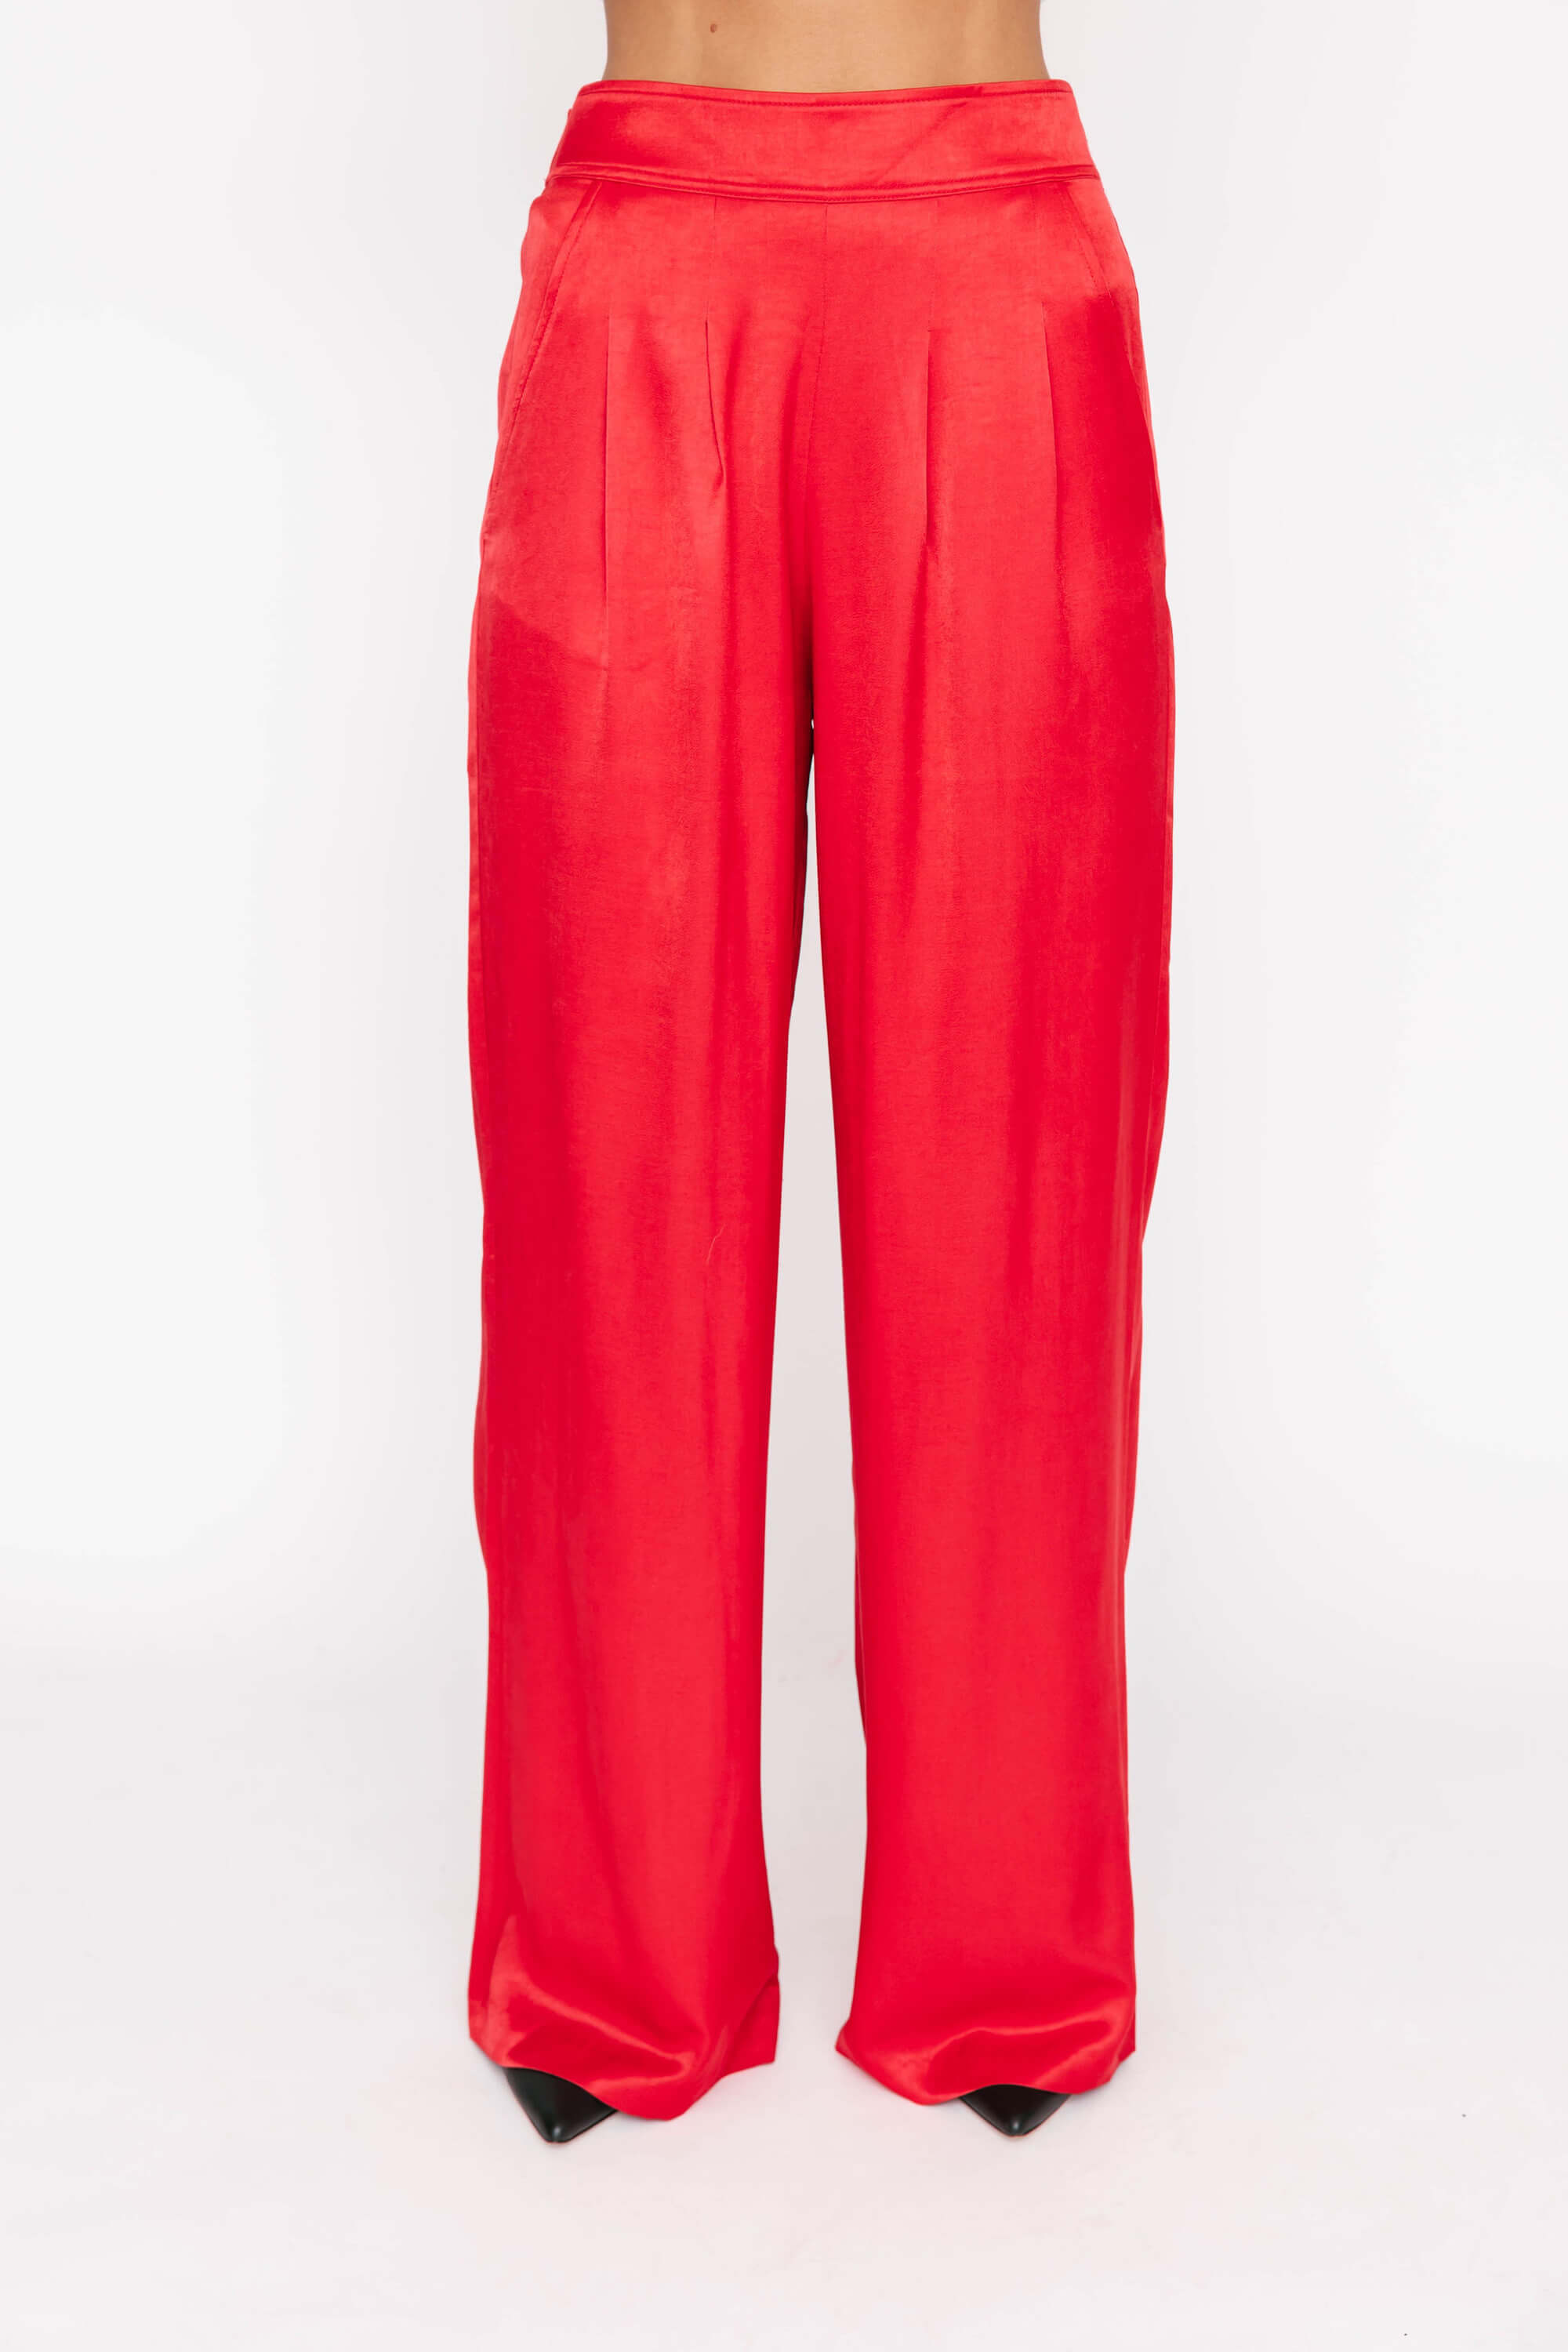 Smash + Tess Holden Wide Leg Pant in Ruby Red